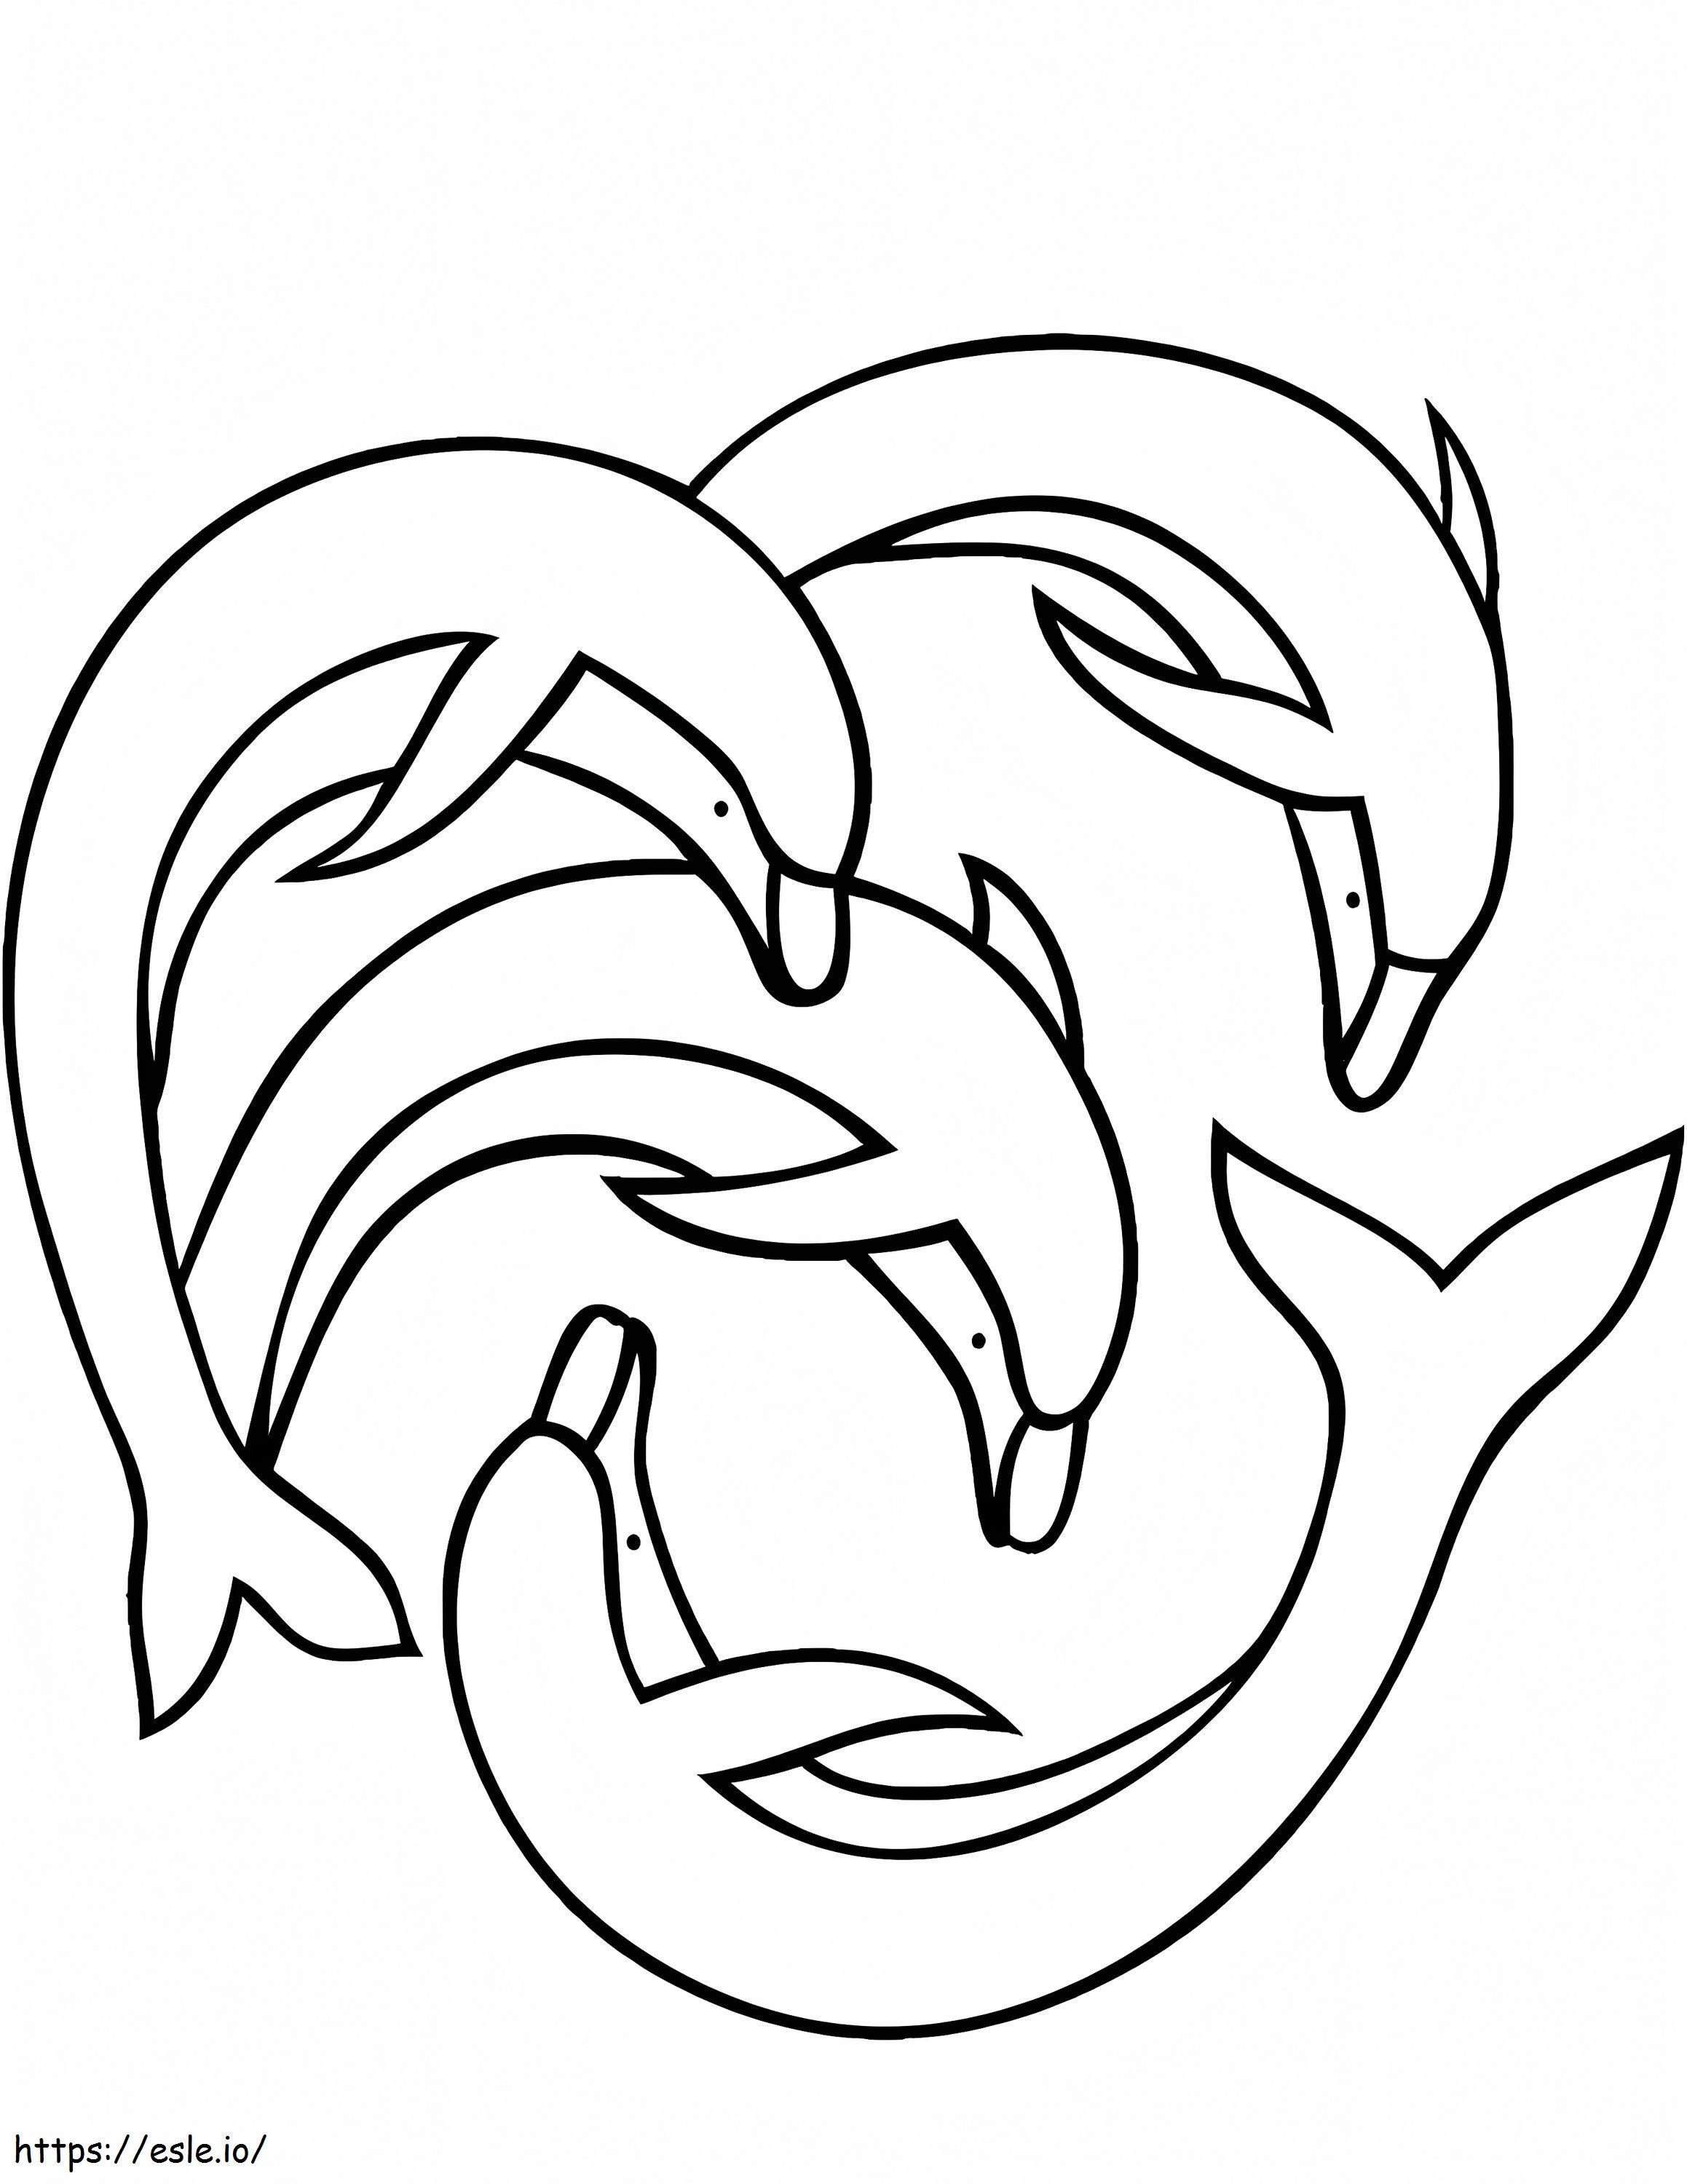 Four Dolphins coloring page